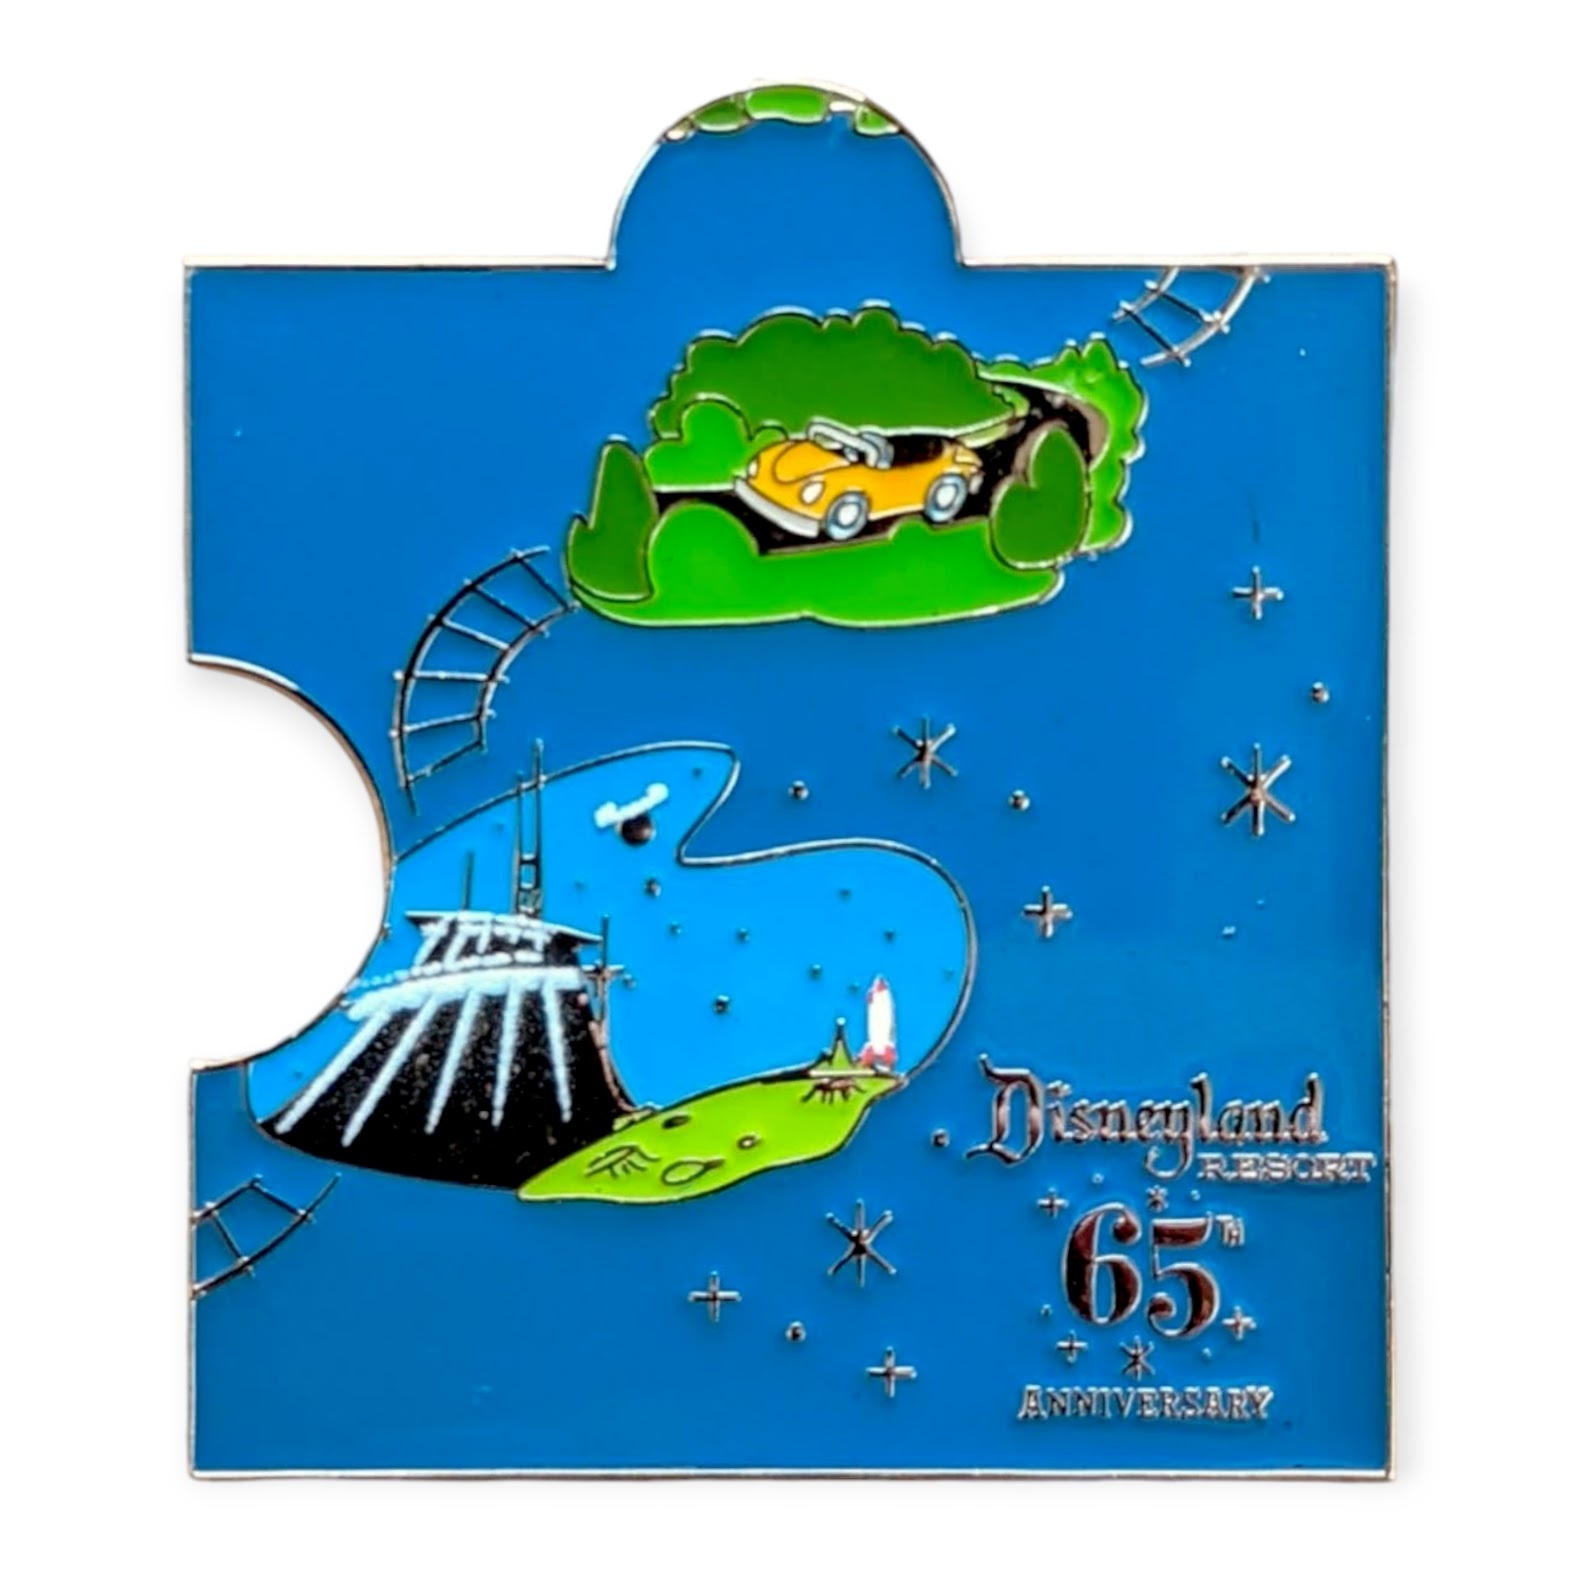 Primary image for Disneyland 65th Anniversary Pin: Autopia, Space Mountain Map Puzzle